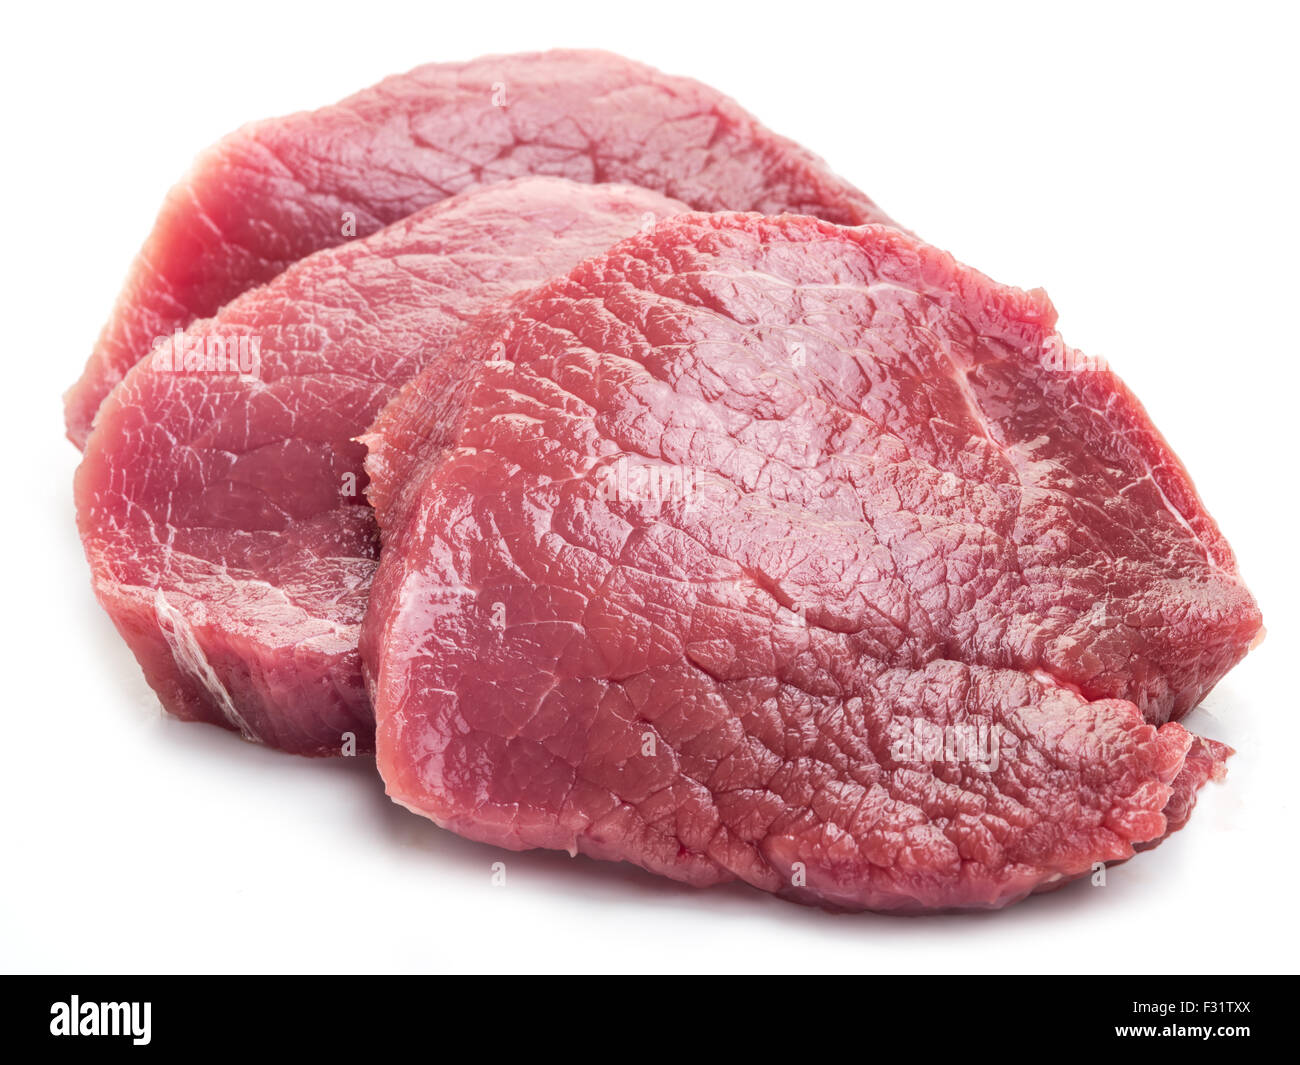 Raw beef steaks on a white background. Stock Photo